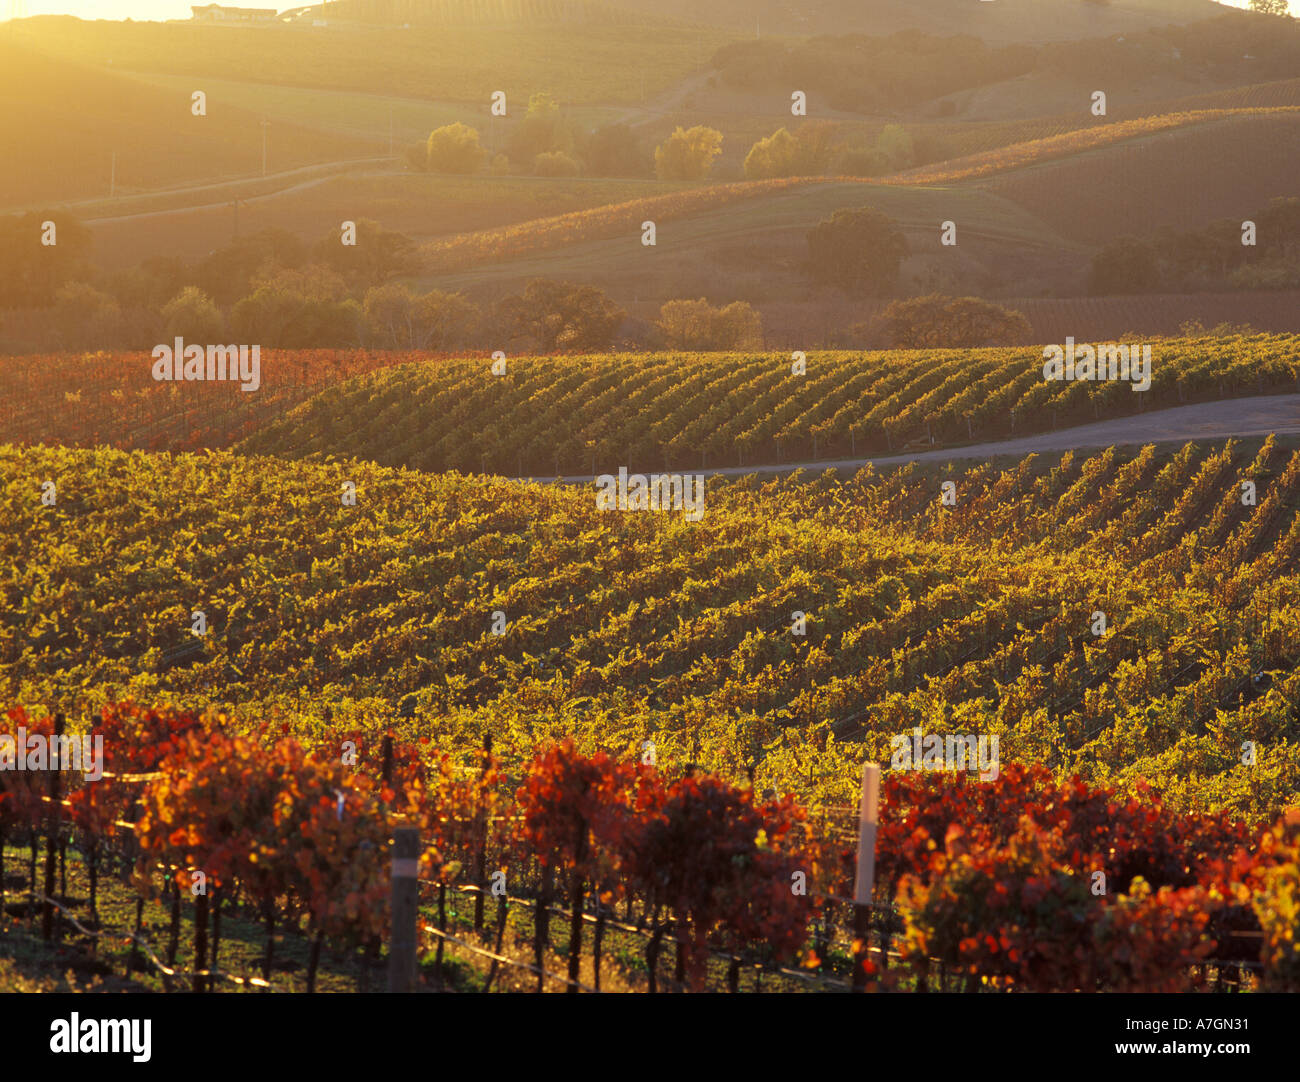 USA, California, Napa Valley, Carneros Ava. Afternoon light skims over hillsides and fall colors of the vineyard. Stock Photo